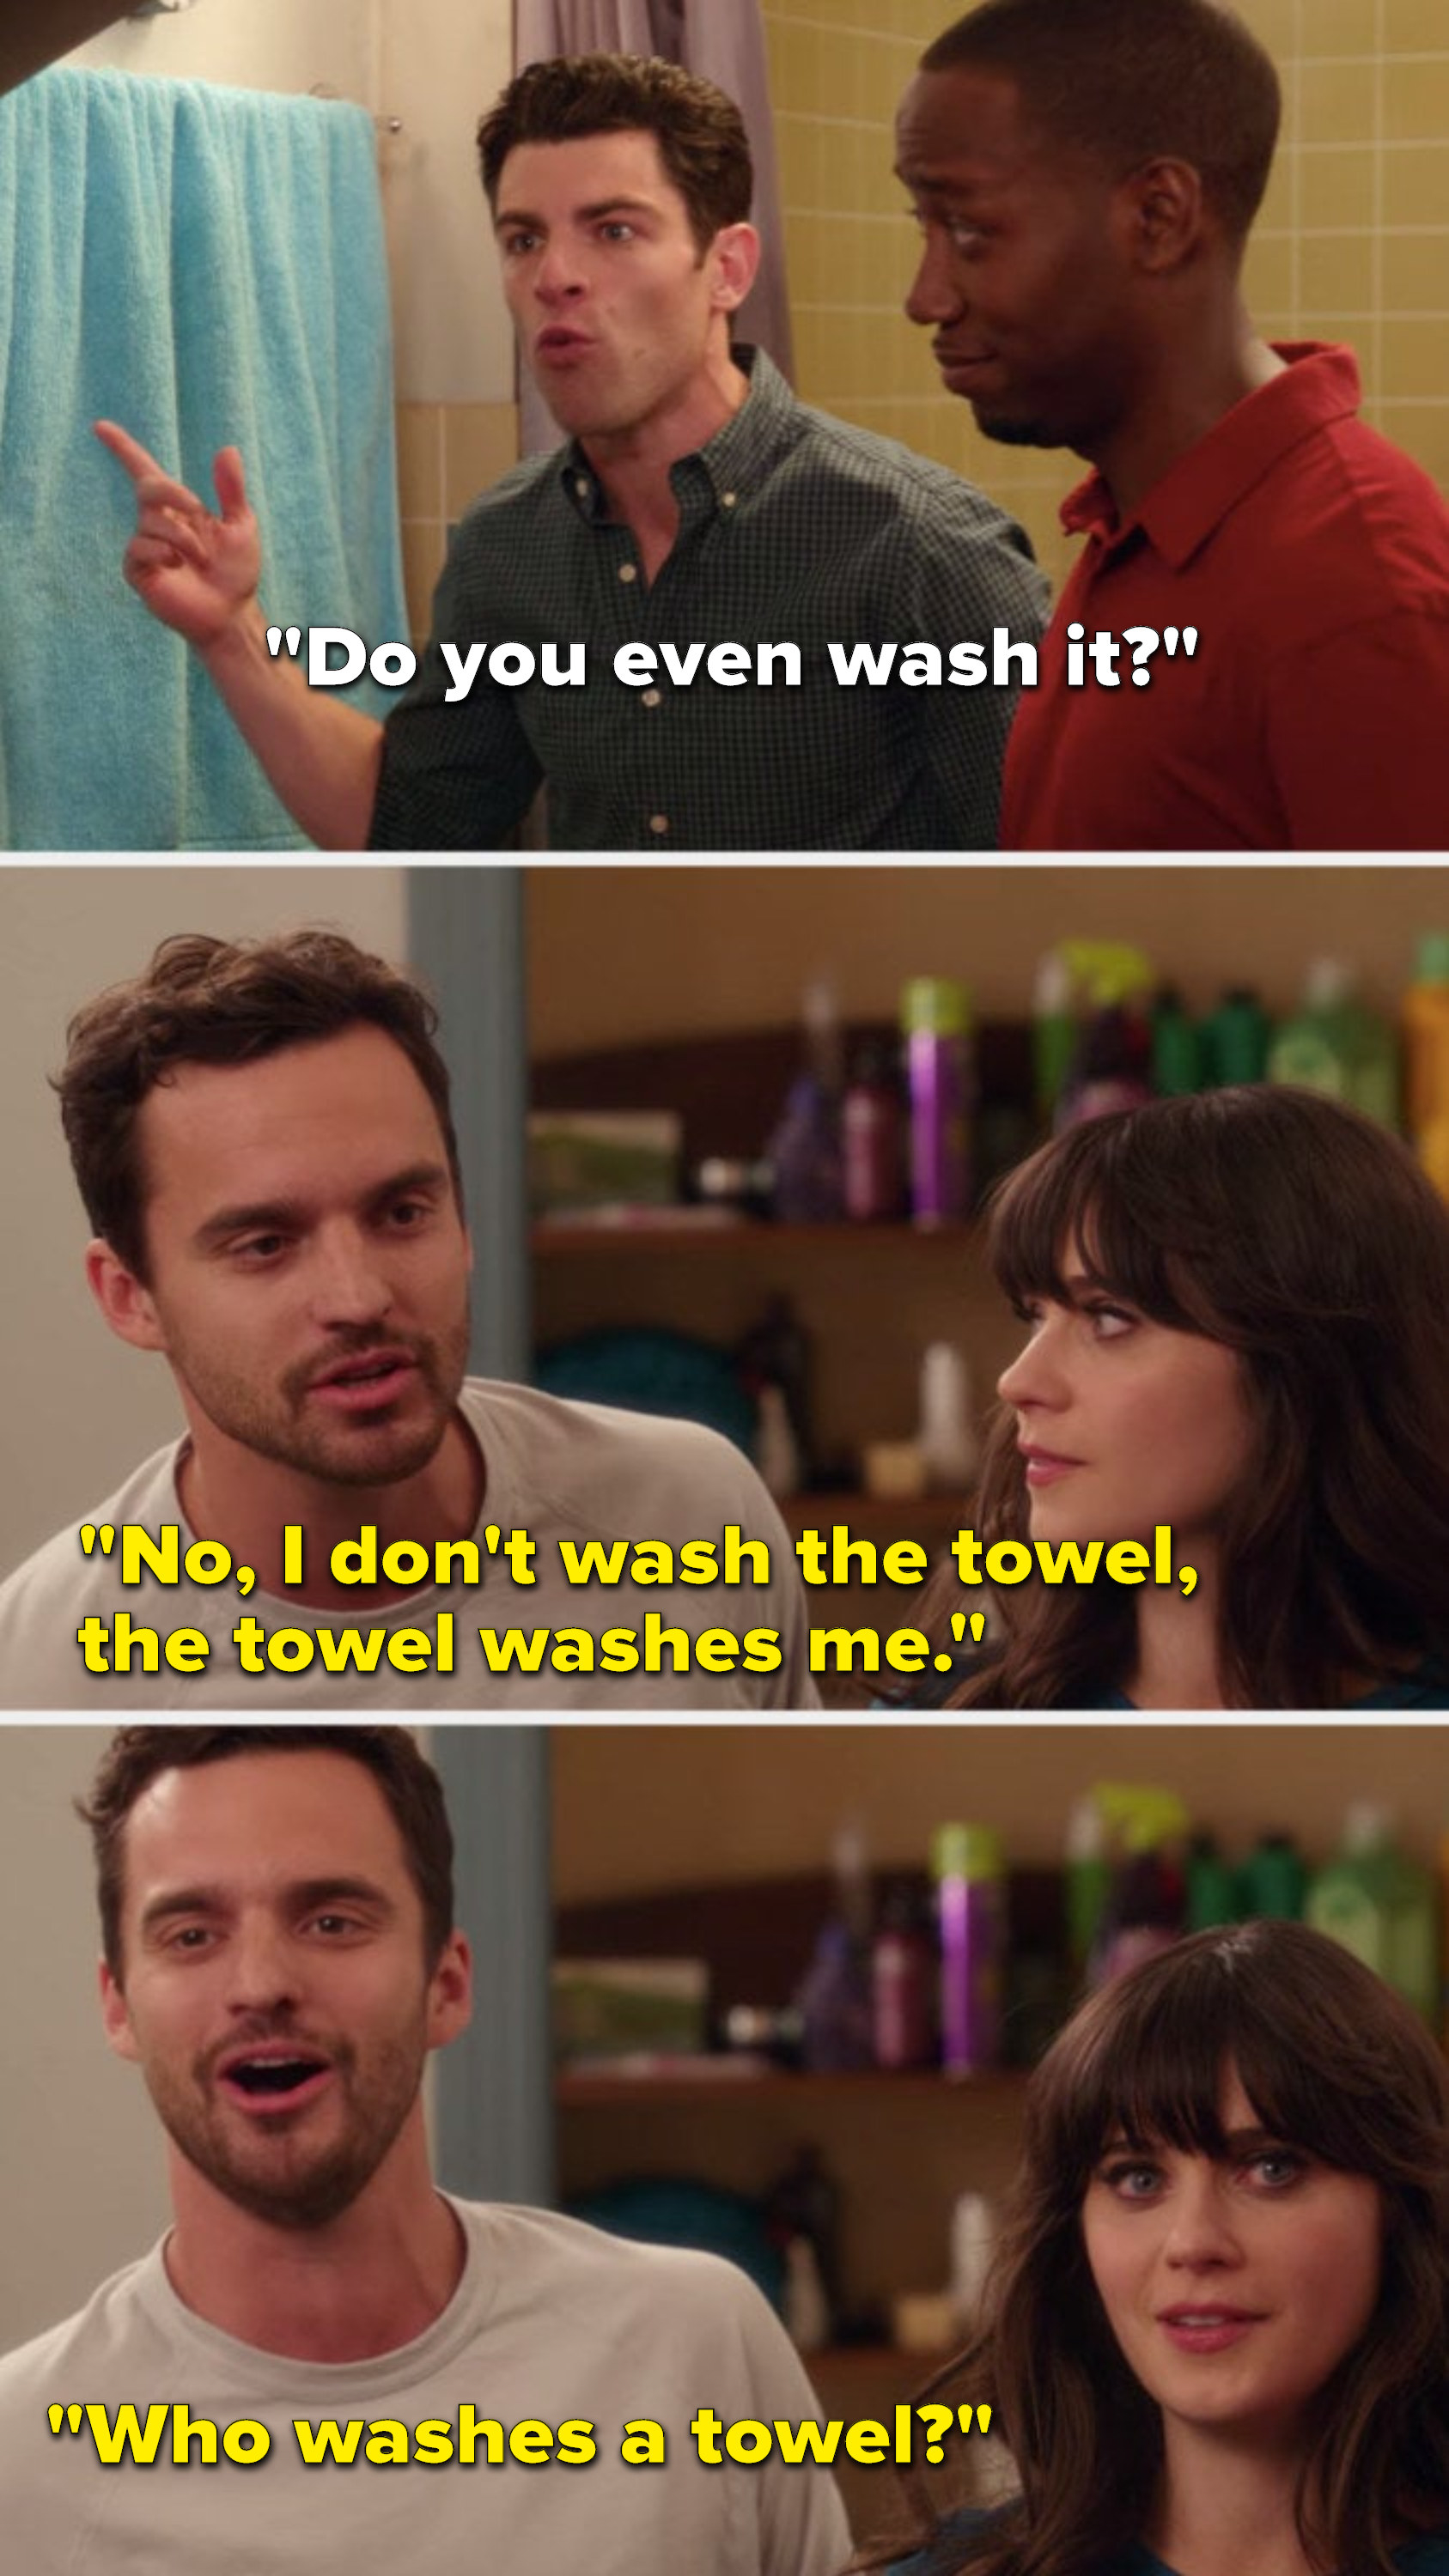 Schmidt says, &quot;Do you even wash it&quot; and Nick says, &quot;No, I don&#x27;t wash the towel, the towel washes me, who washes a towel&quot;